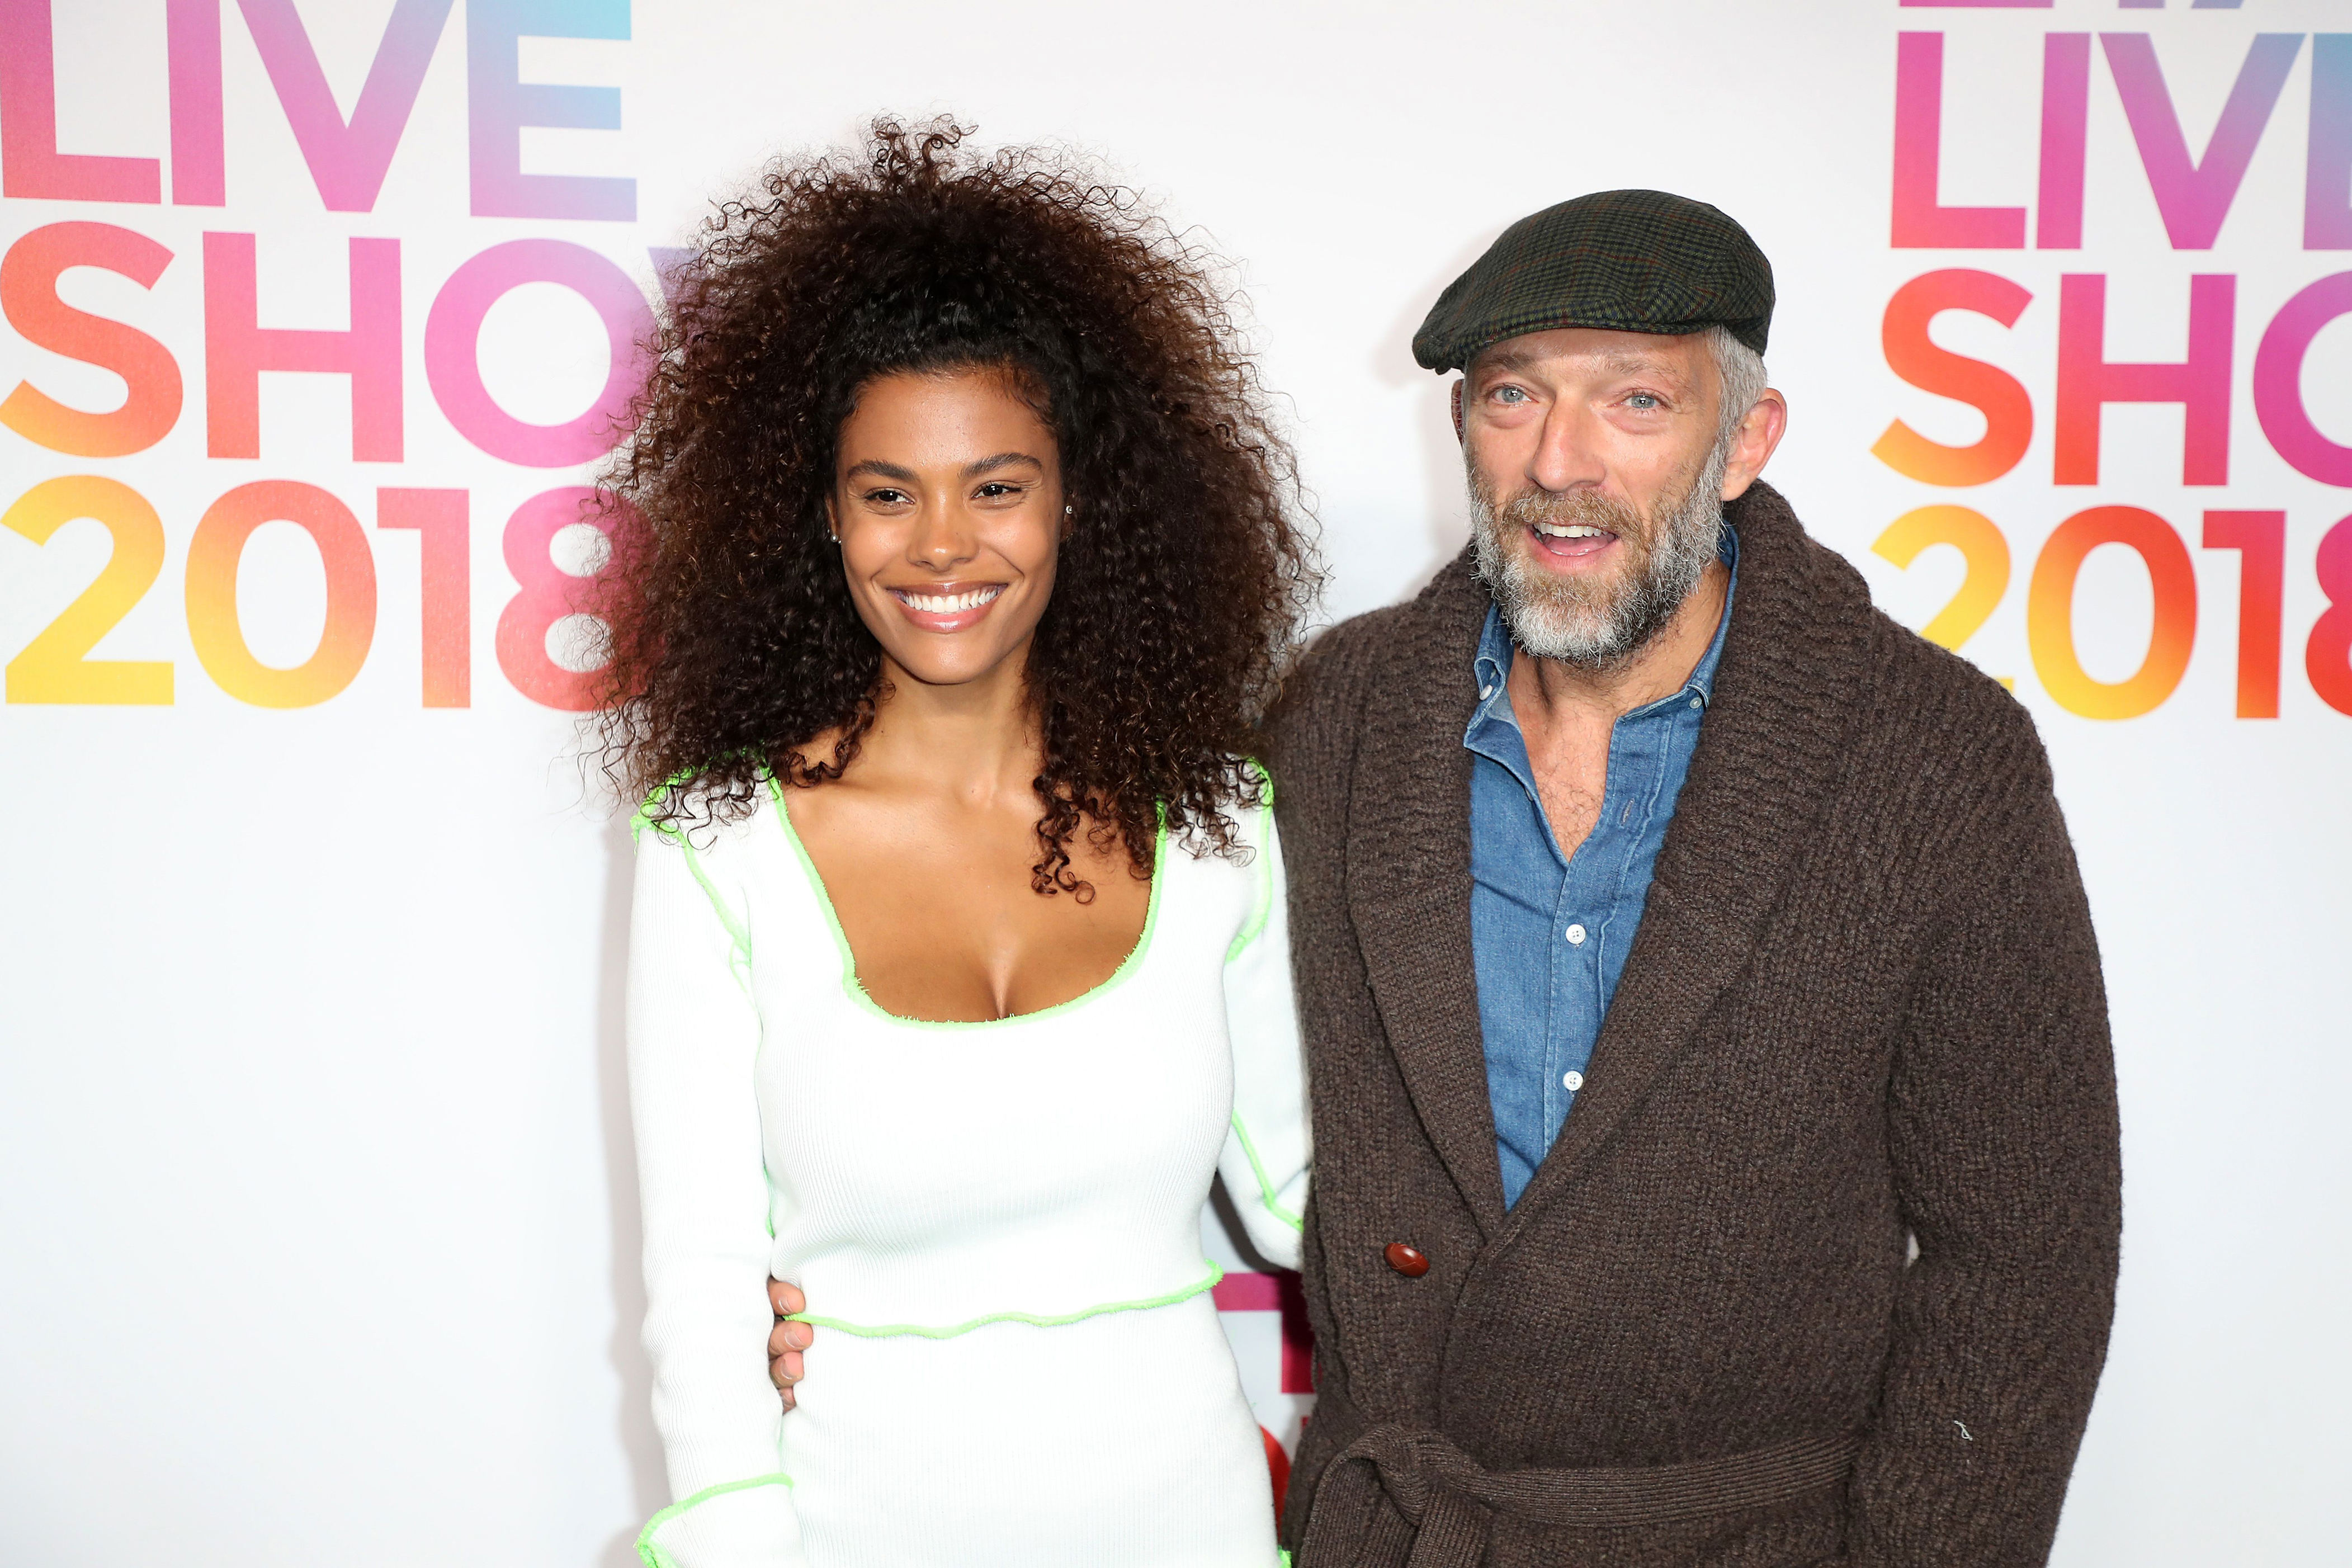 <p>"Oceans 12" star Vincent Cassel is 30 years older than his wife, model Tina Kunakey. The couple tied the knot in August 2018 when he was 51 and she was 21 and welcomed a daughter the following year. They began dating when Tina was 19.</p>